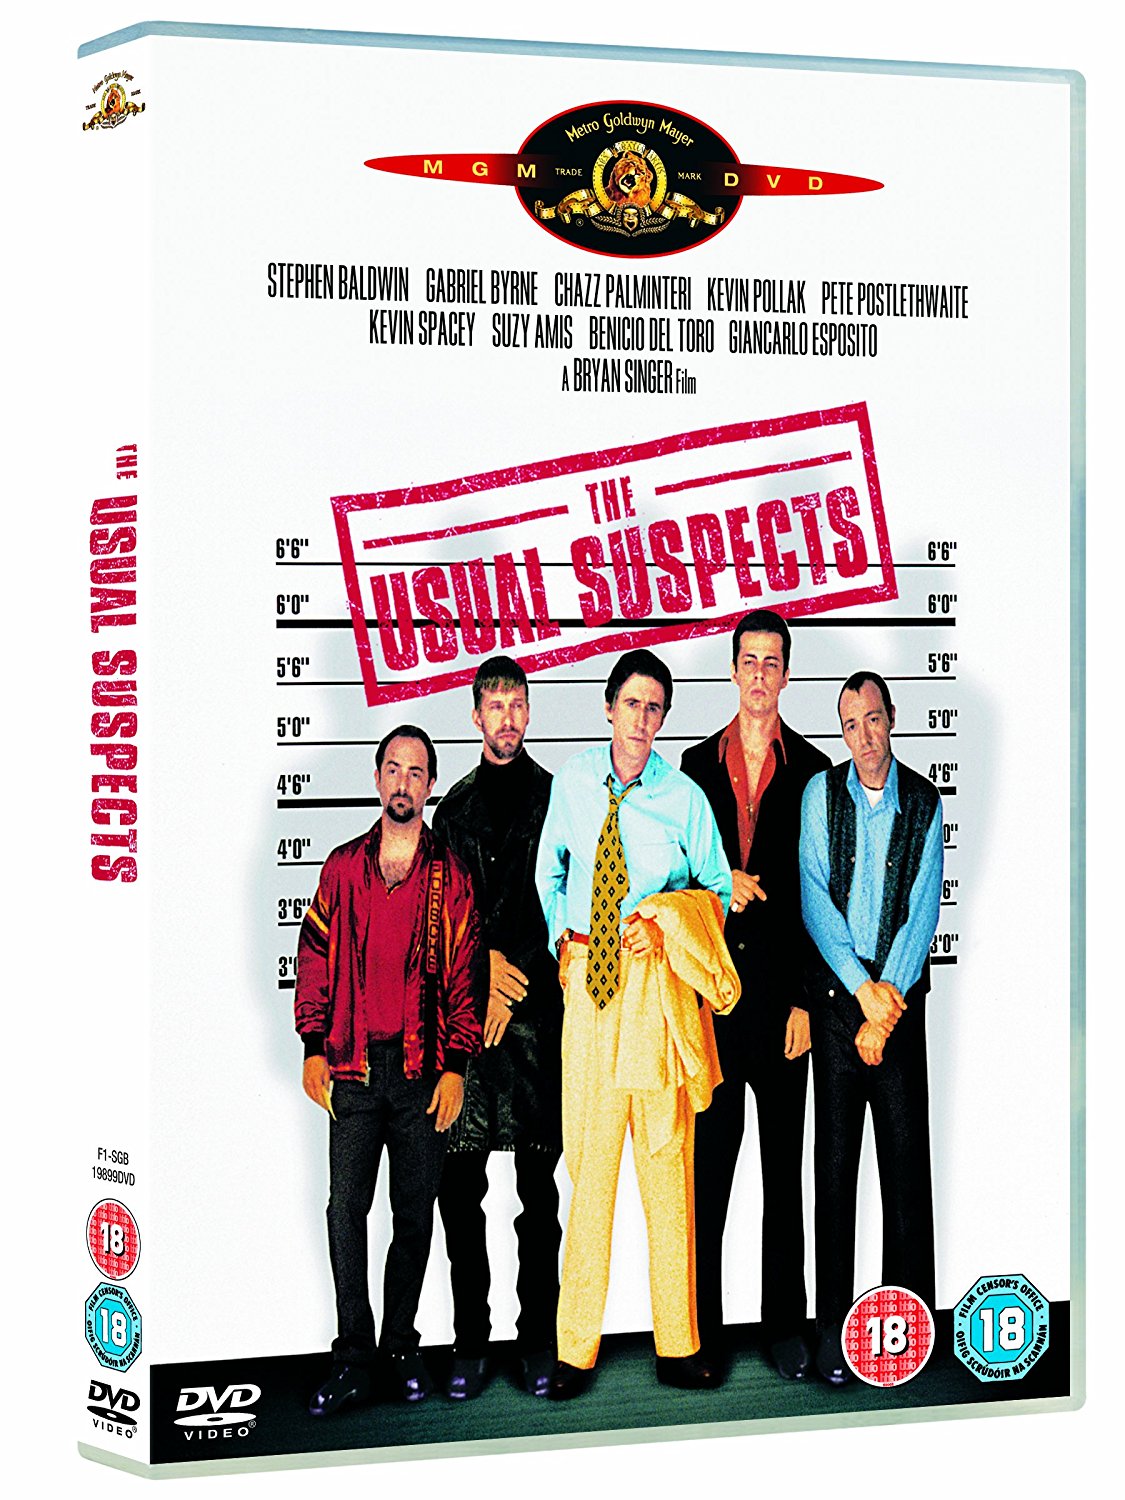 The Usual Suspects | Bryan Singer